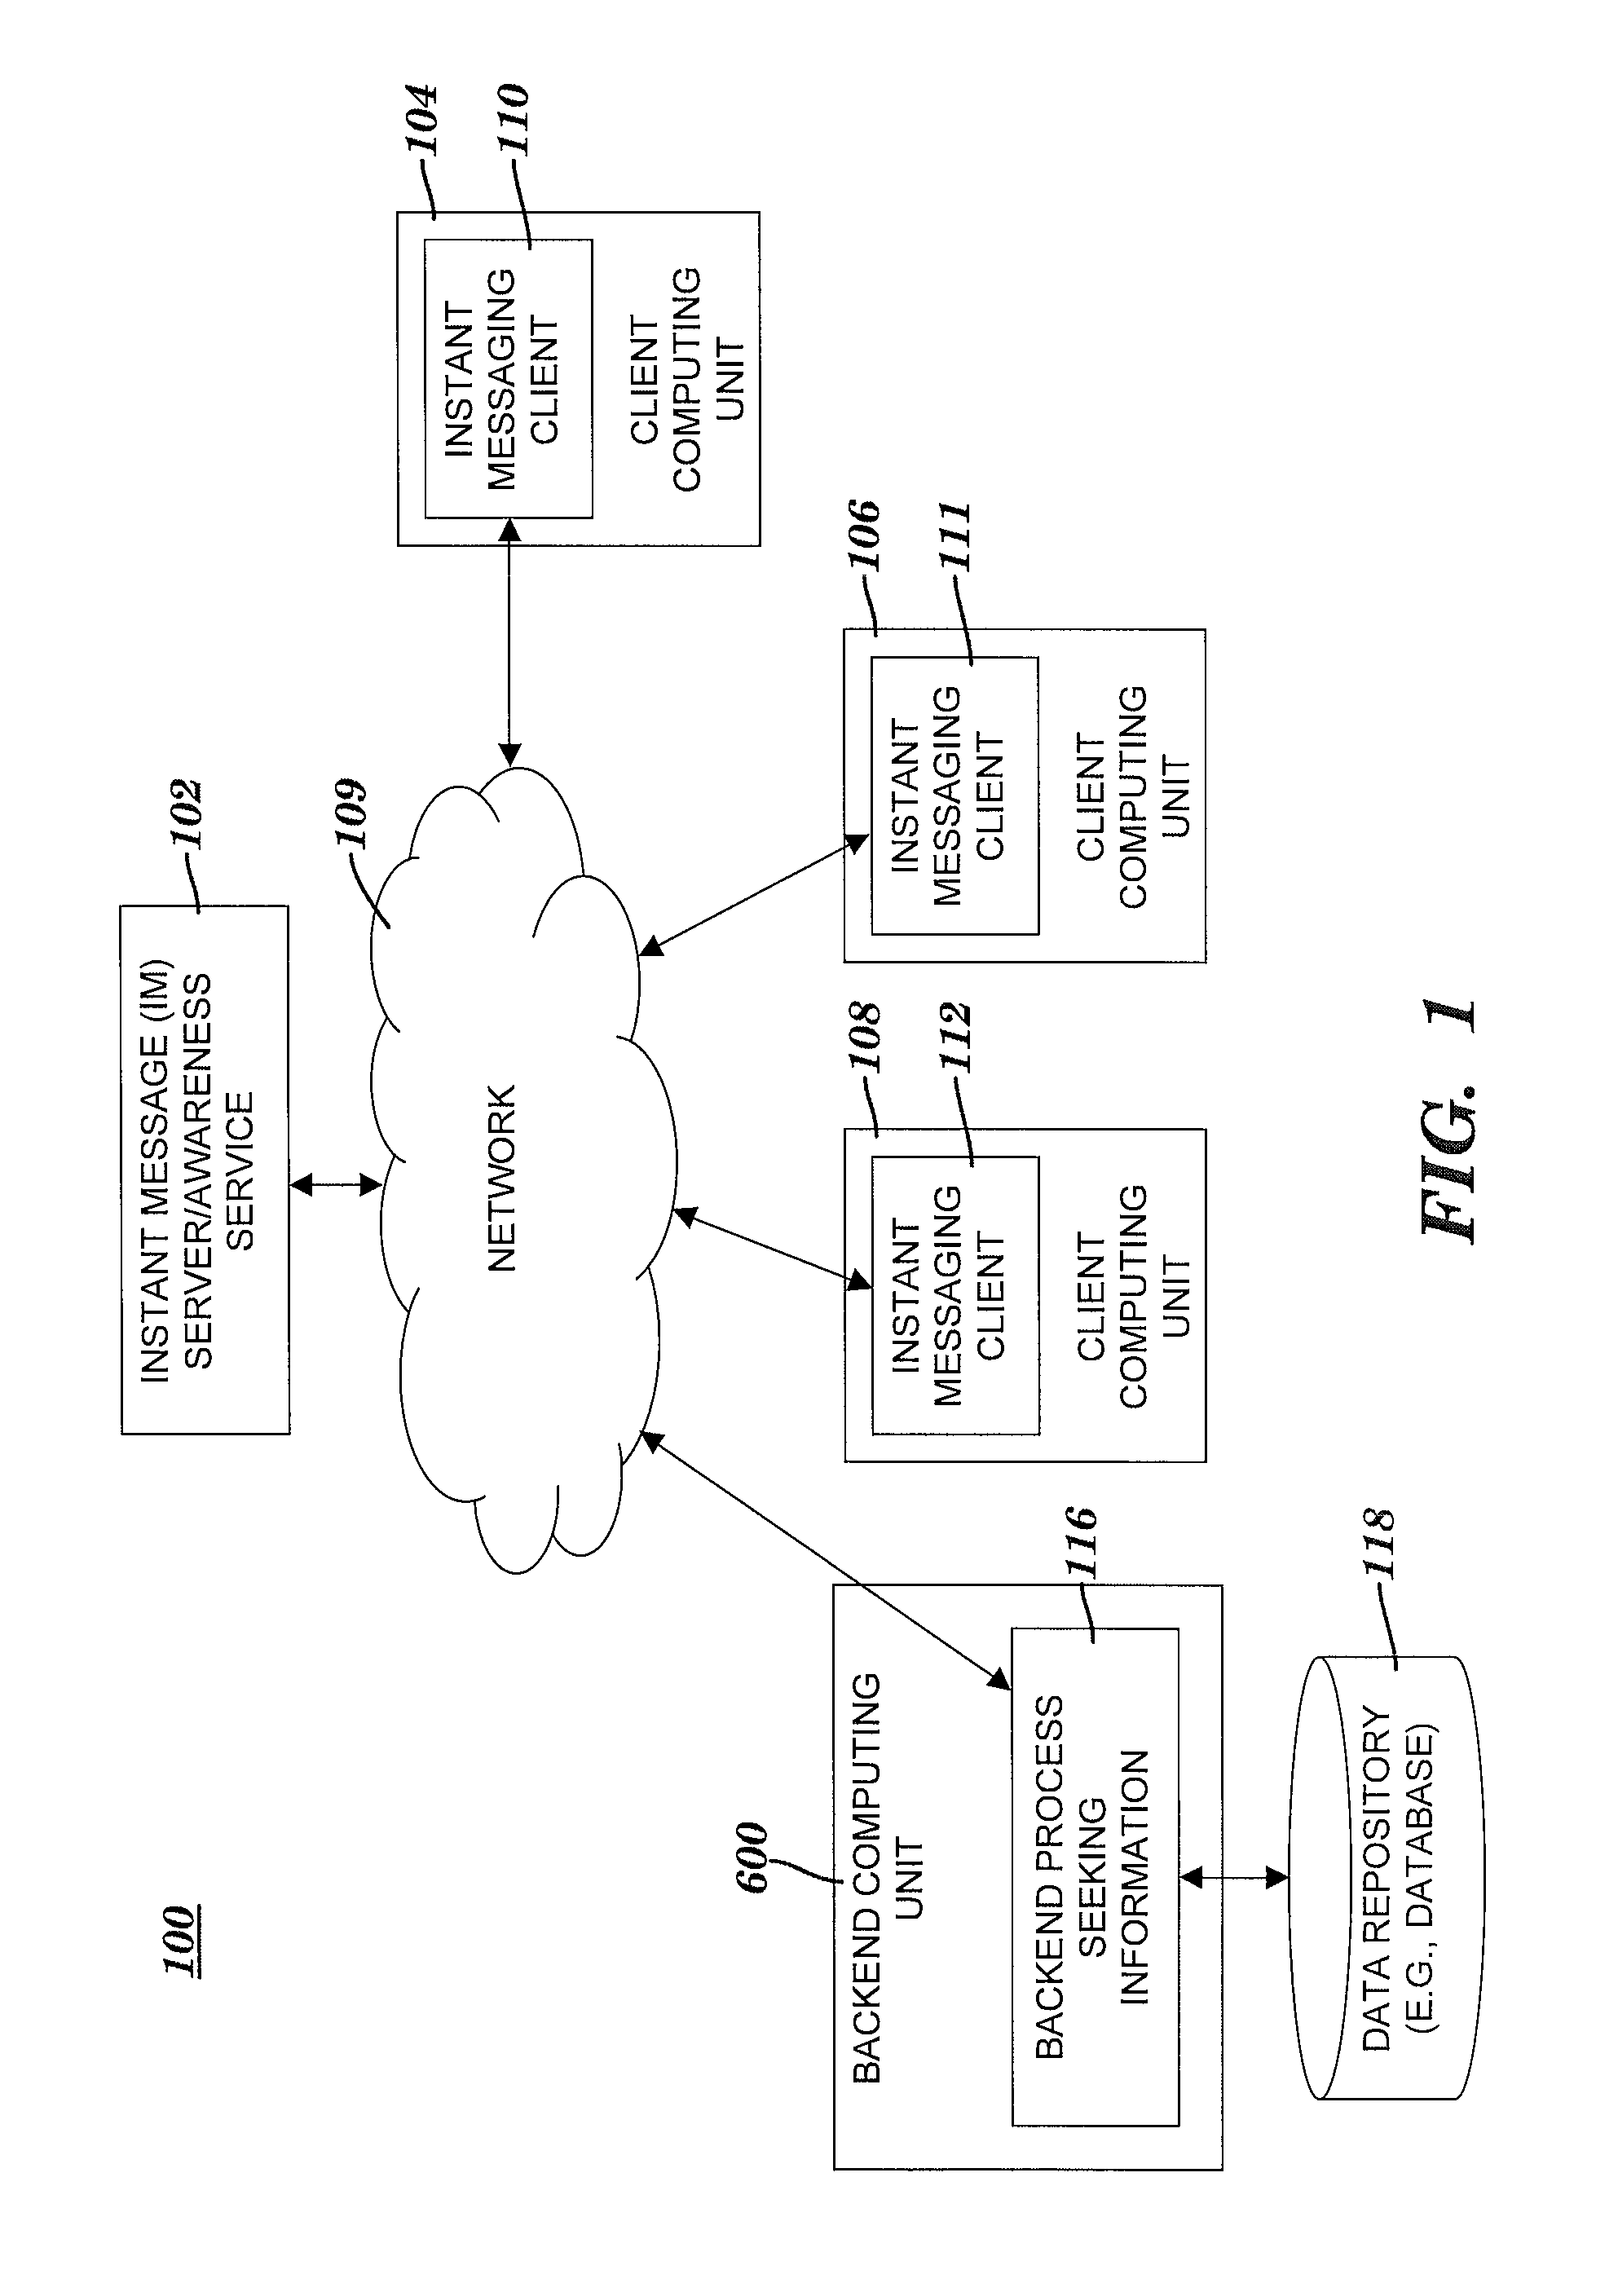 Managing a workflow using an instant messaging system to gather task status information